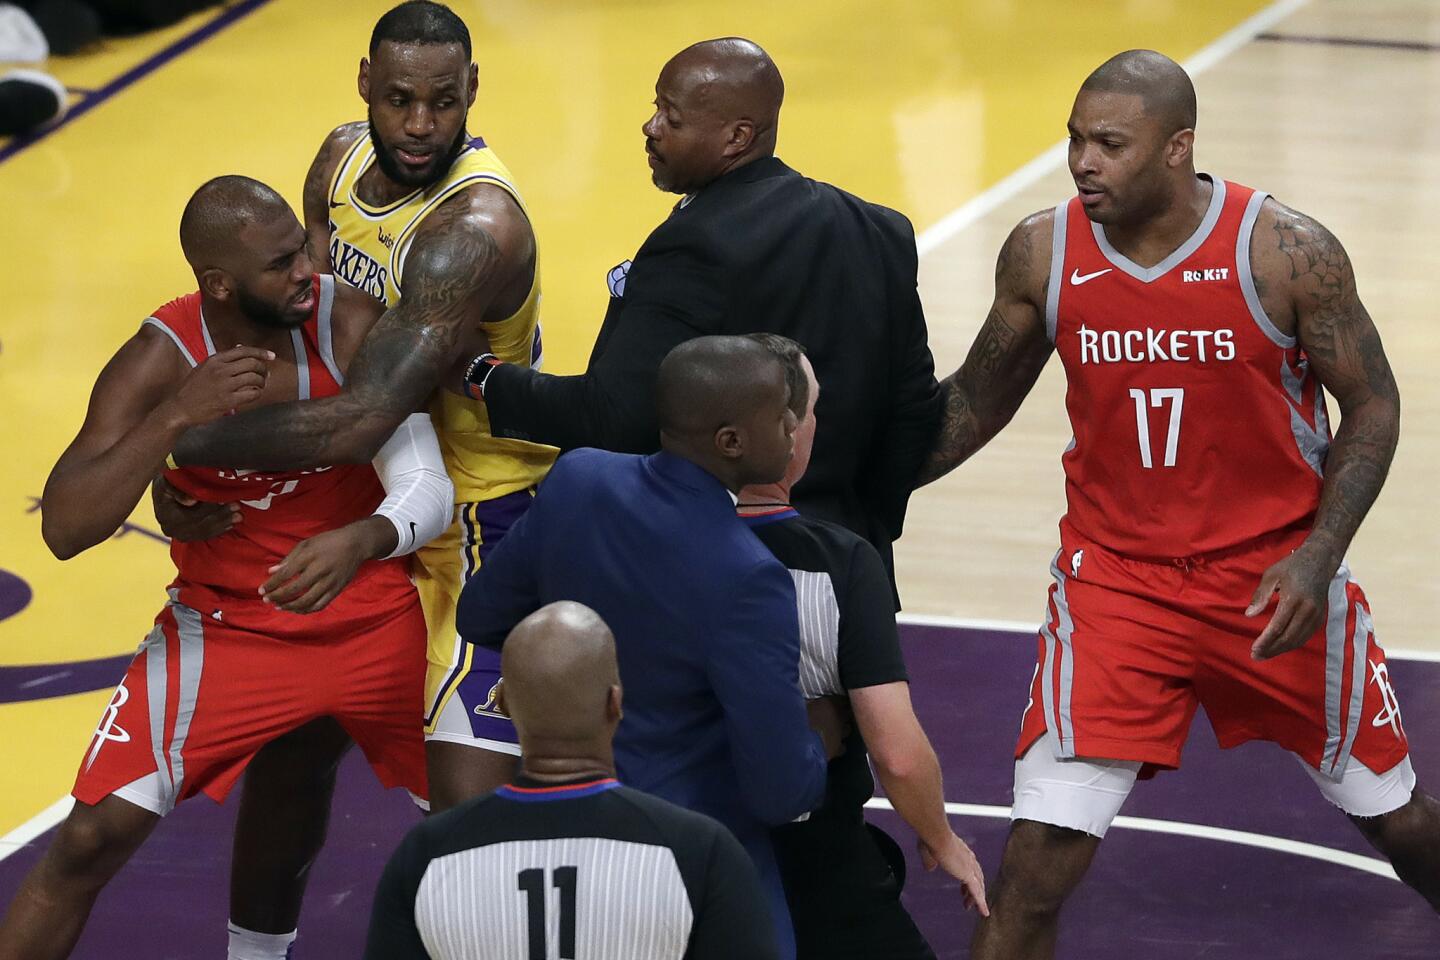 Rockets guard Chris Paul, left, is held back by Lakers forward LeBron James after Paul and Rockets guard Rajon Rondo (not pictured) exchanged punches.